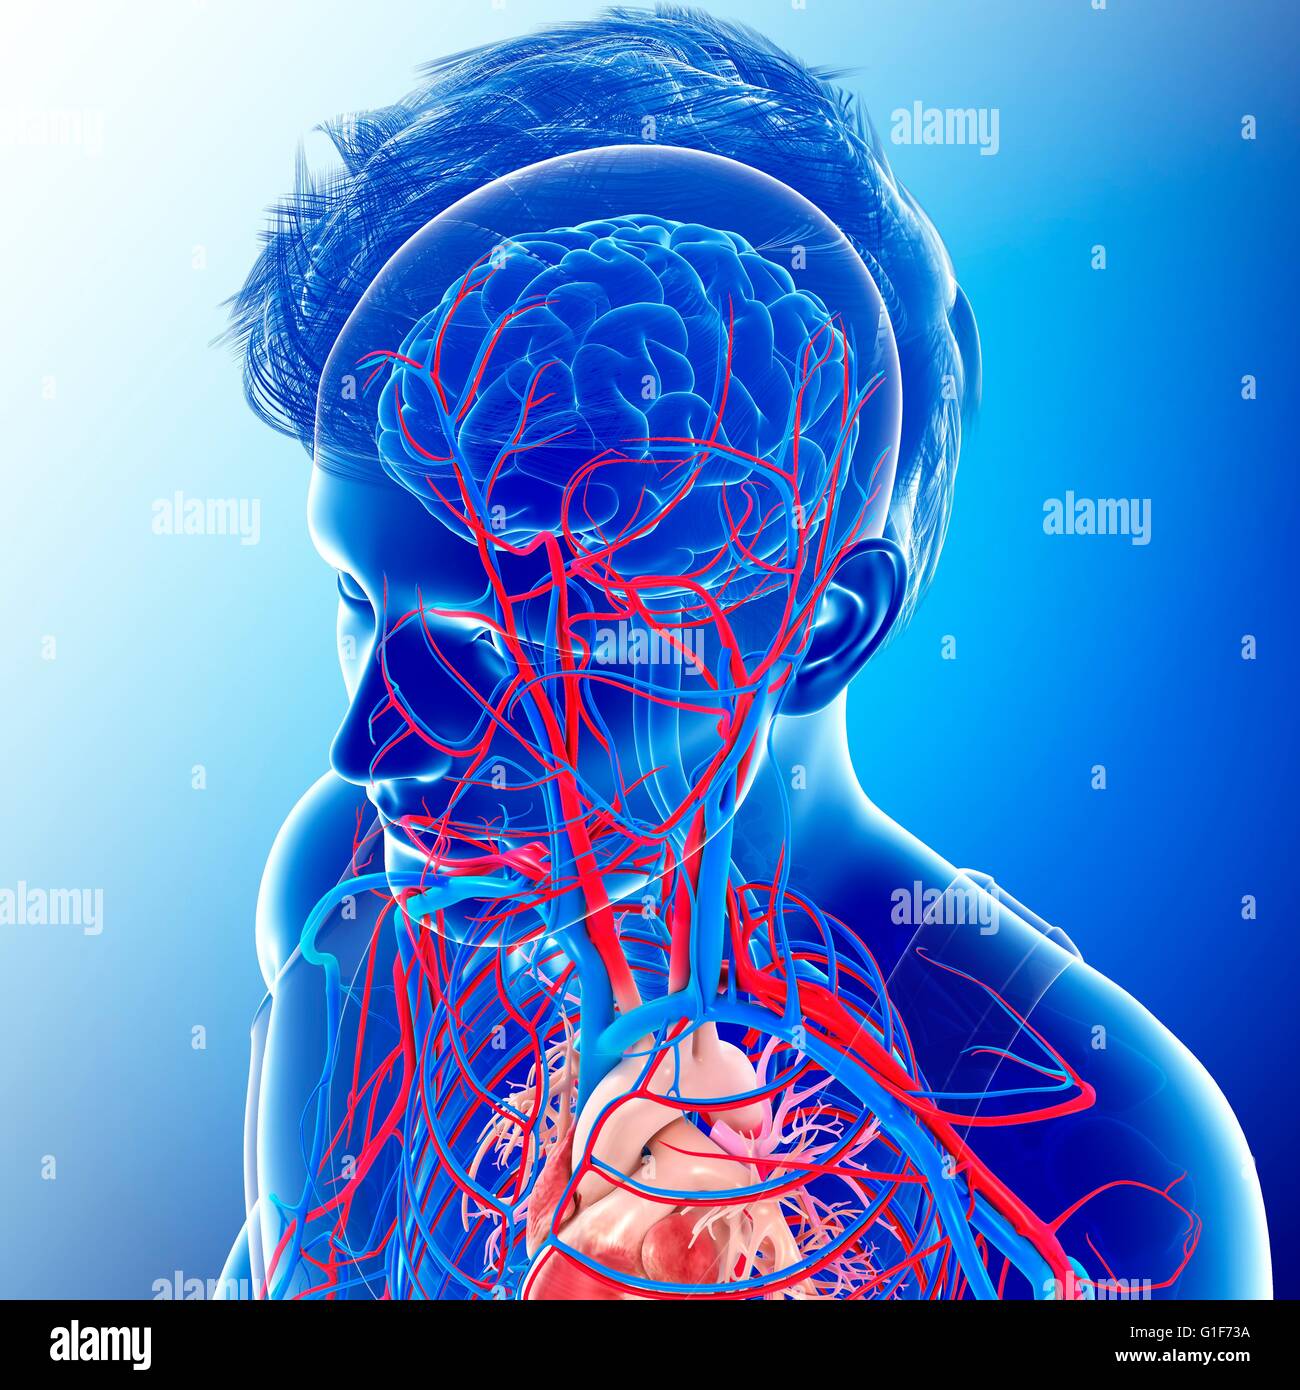 Human Organ Systems High Resolution Stock Photography and Images - Alamy